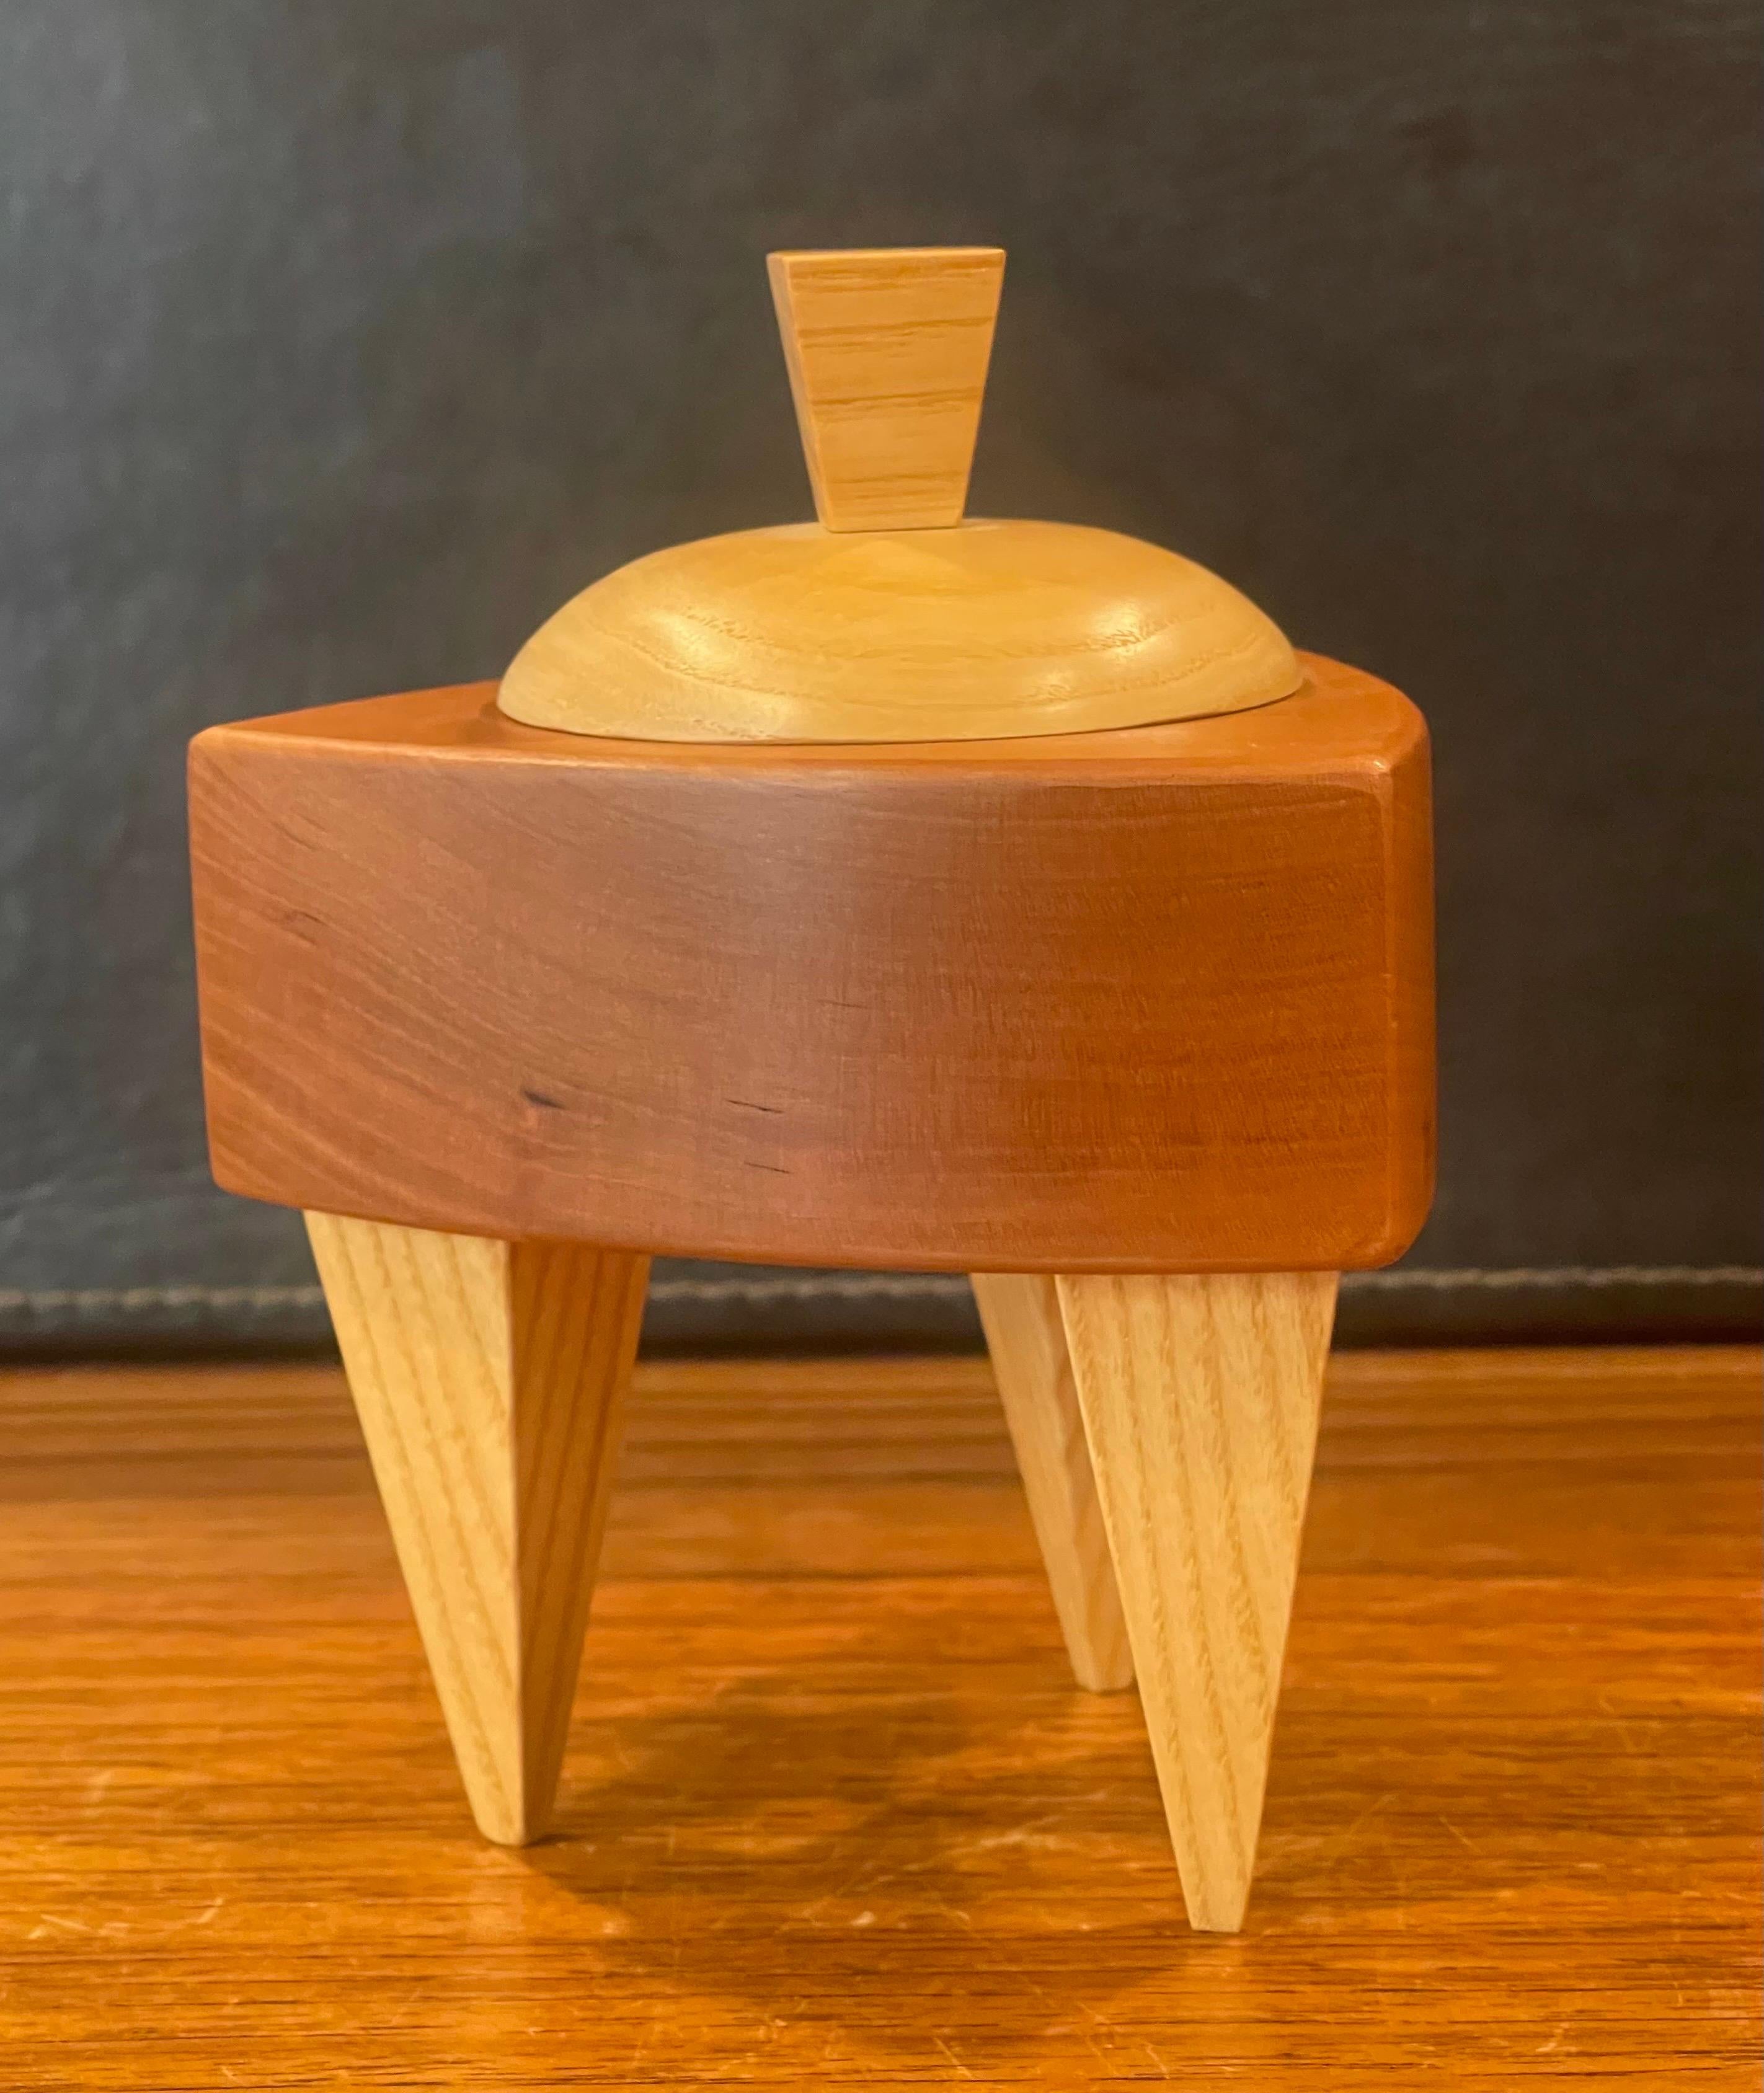 Post-Modern Memphis Style Triangular Mixed Wood Trinket Box by Russ Keil For Sale